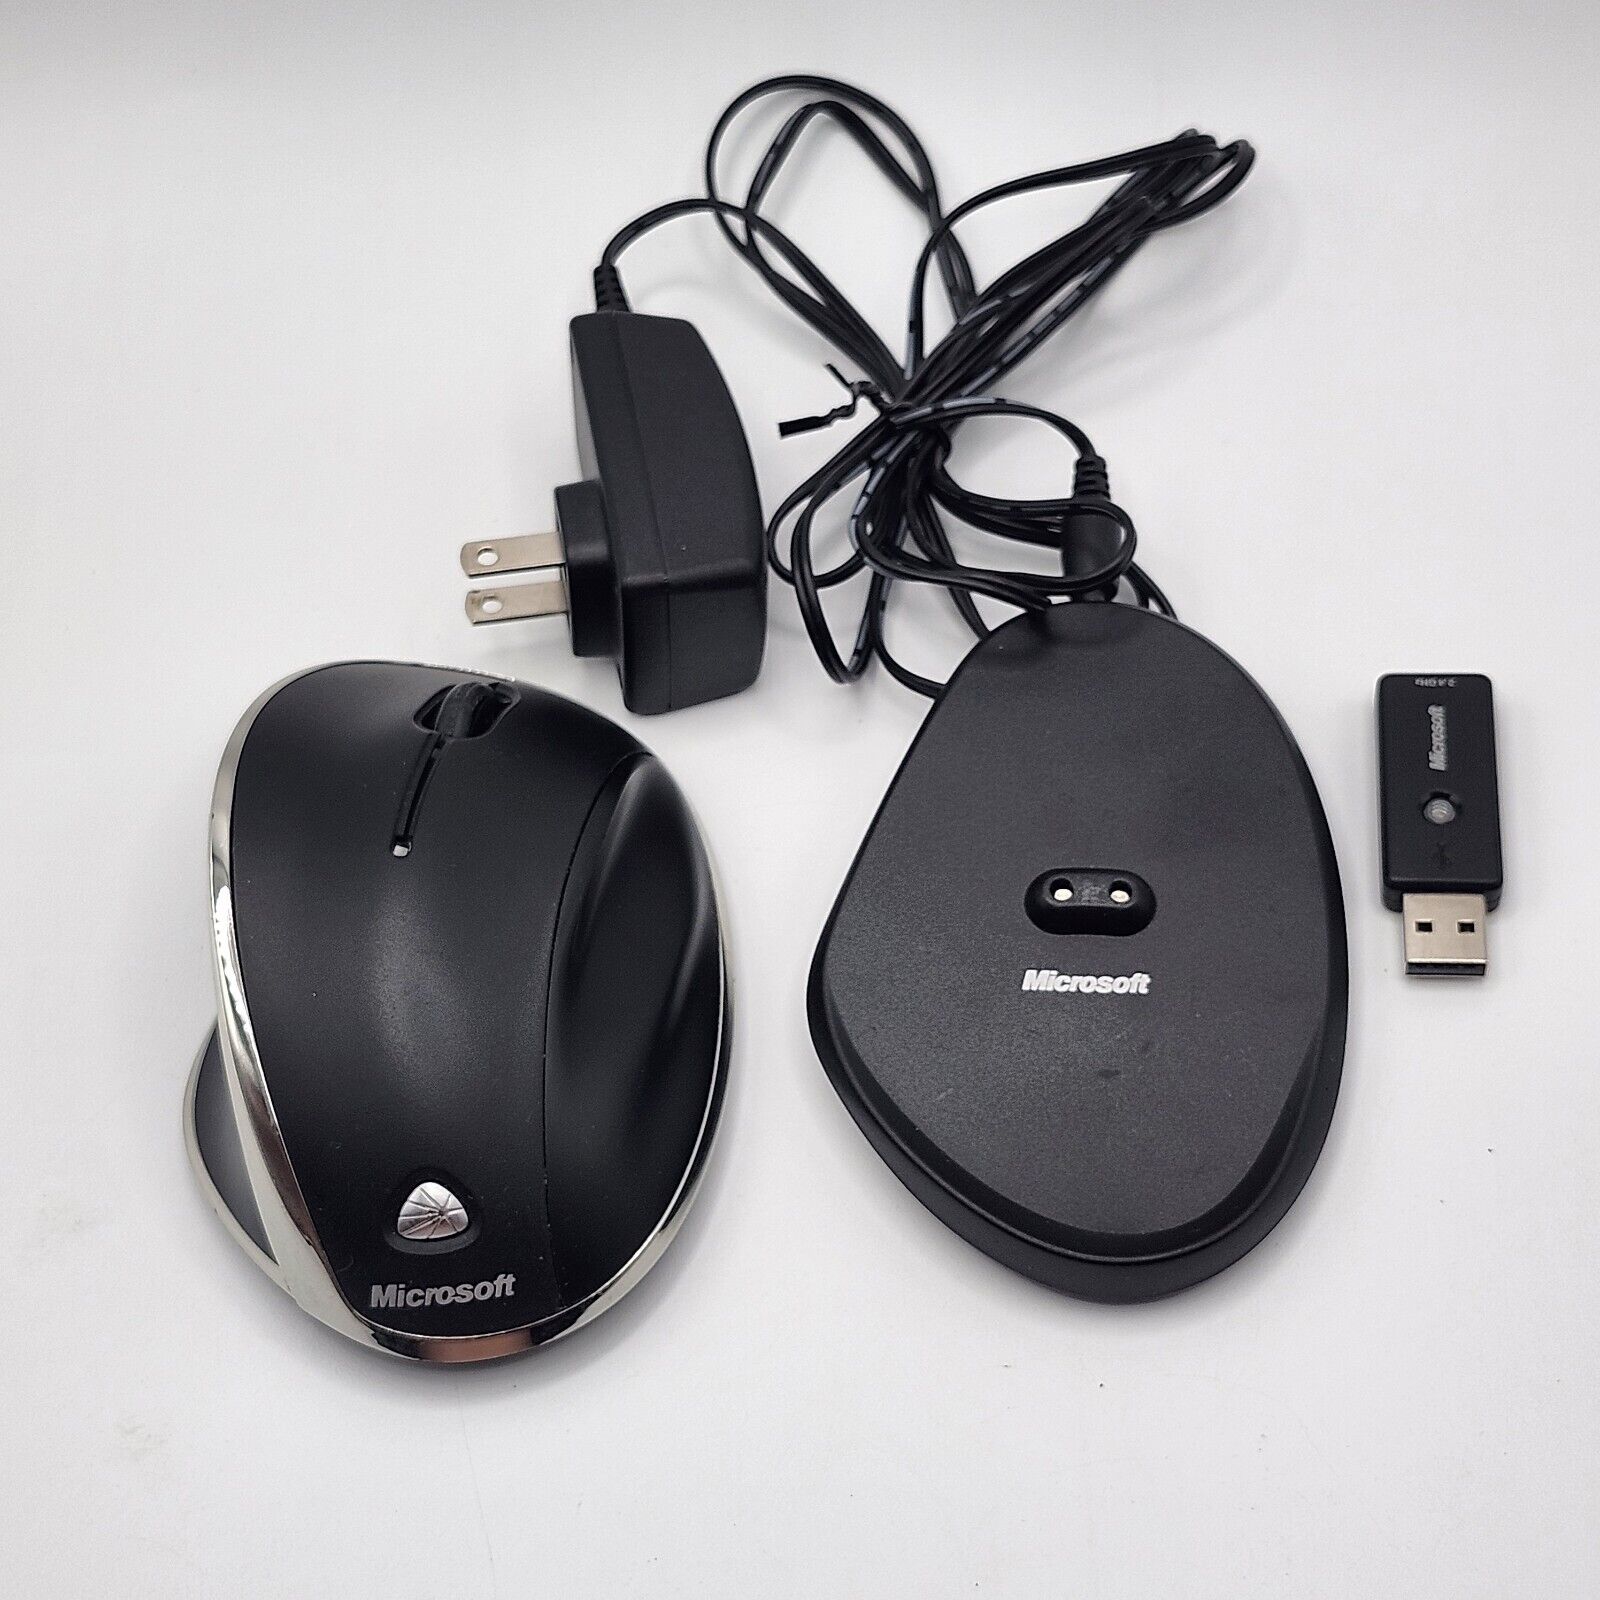 Microsoft Wireless Laser Mouse 7000 Black 1142 w/ Receiver & Charger Tested 